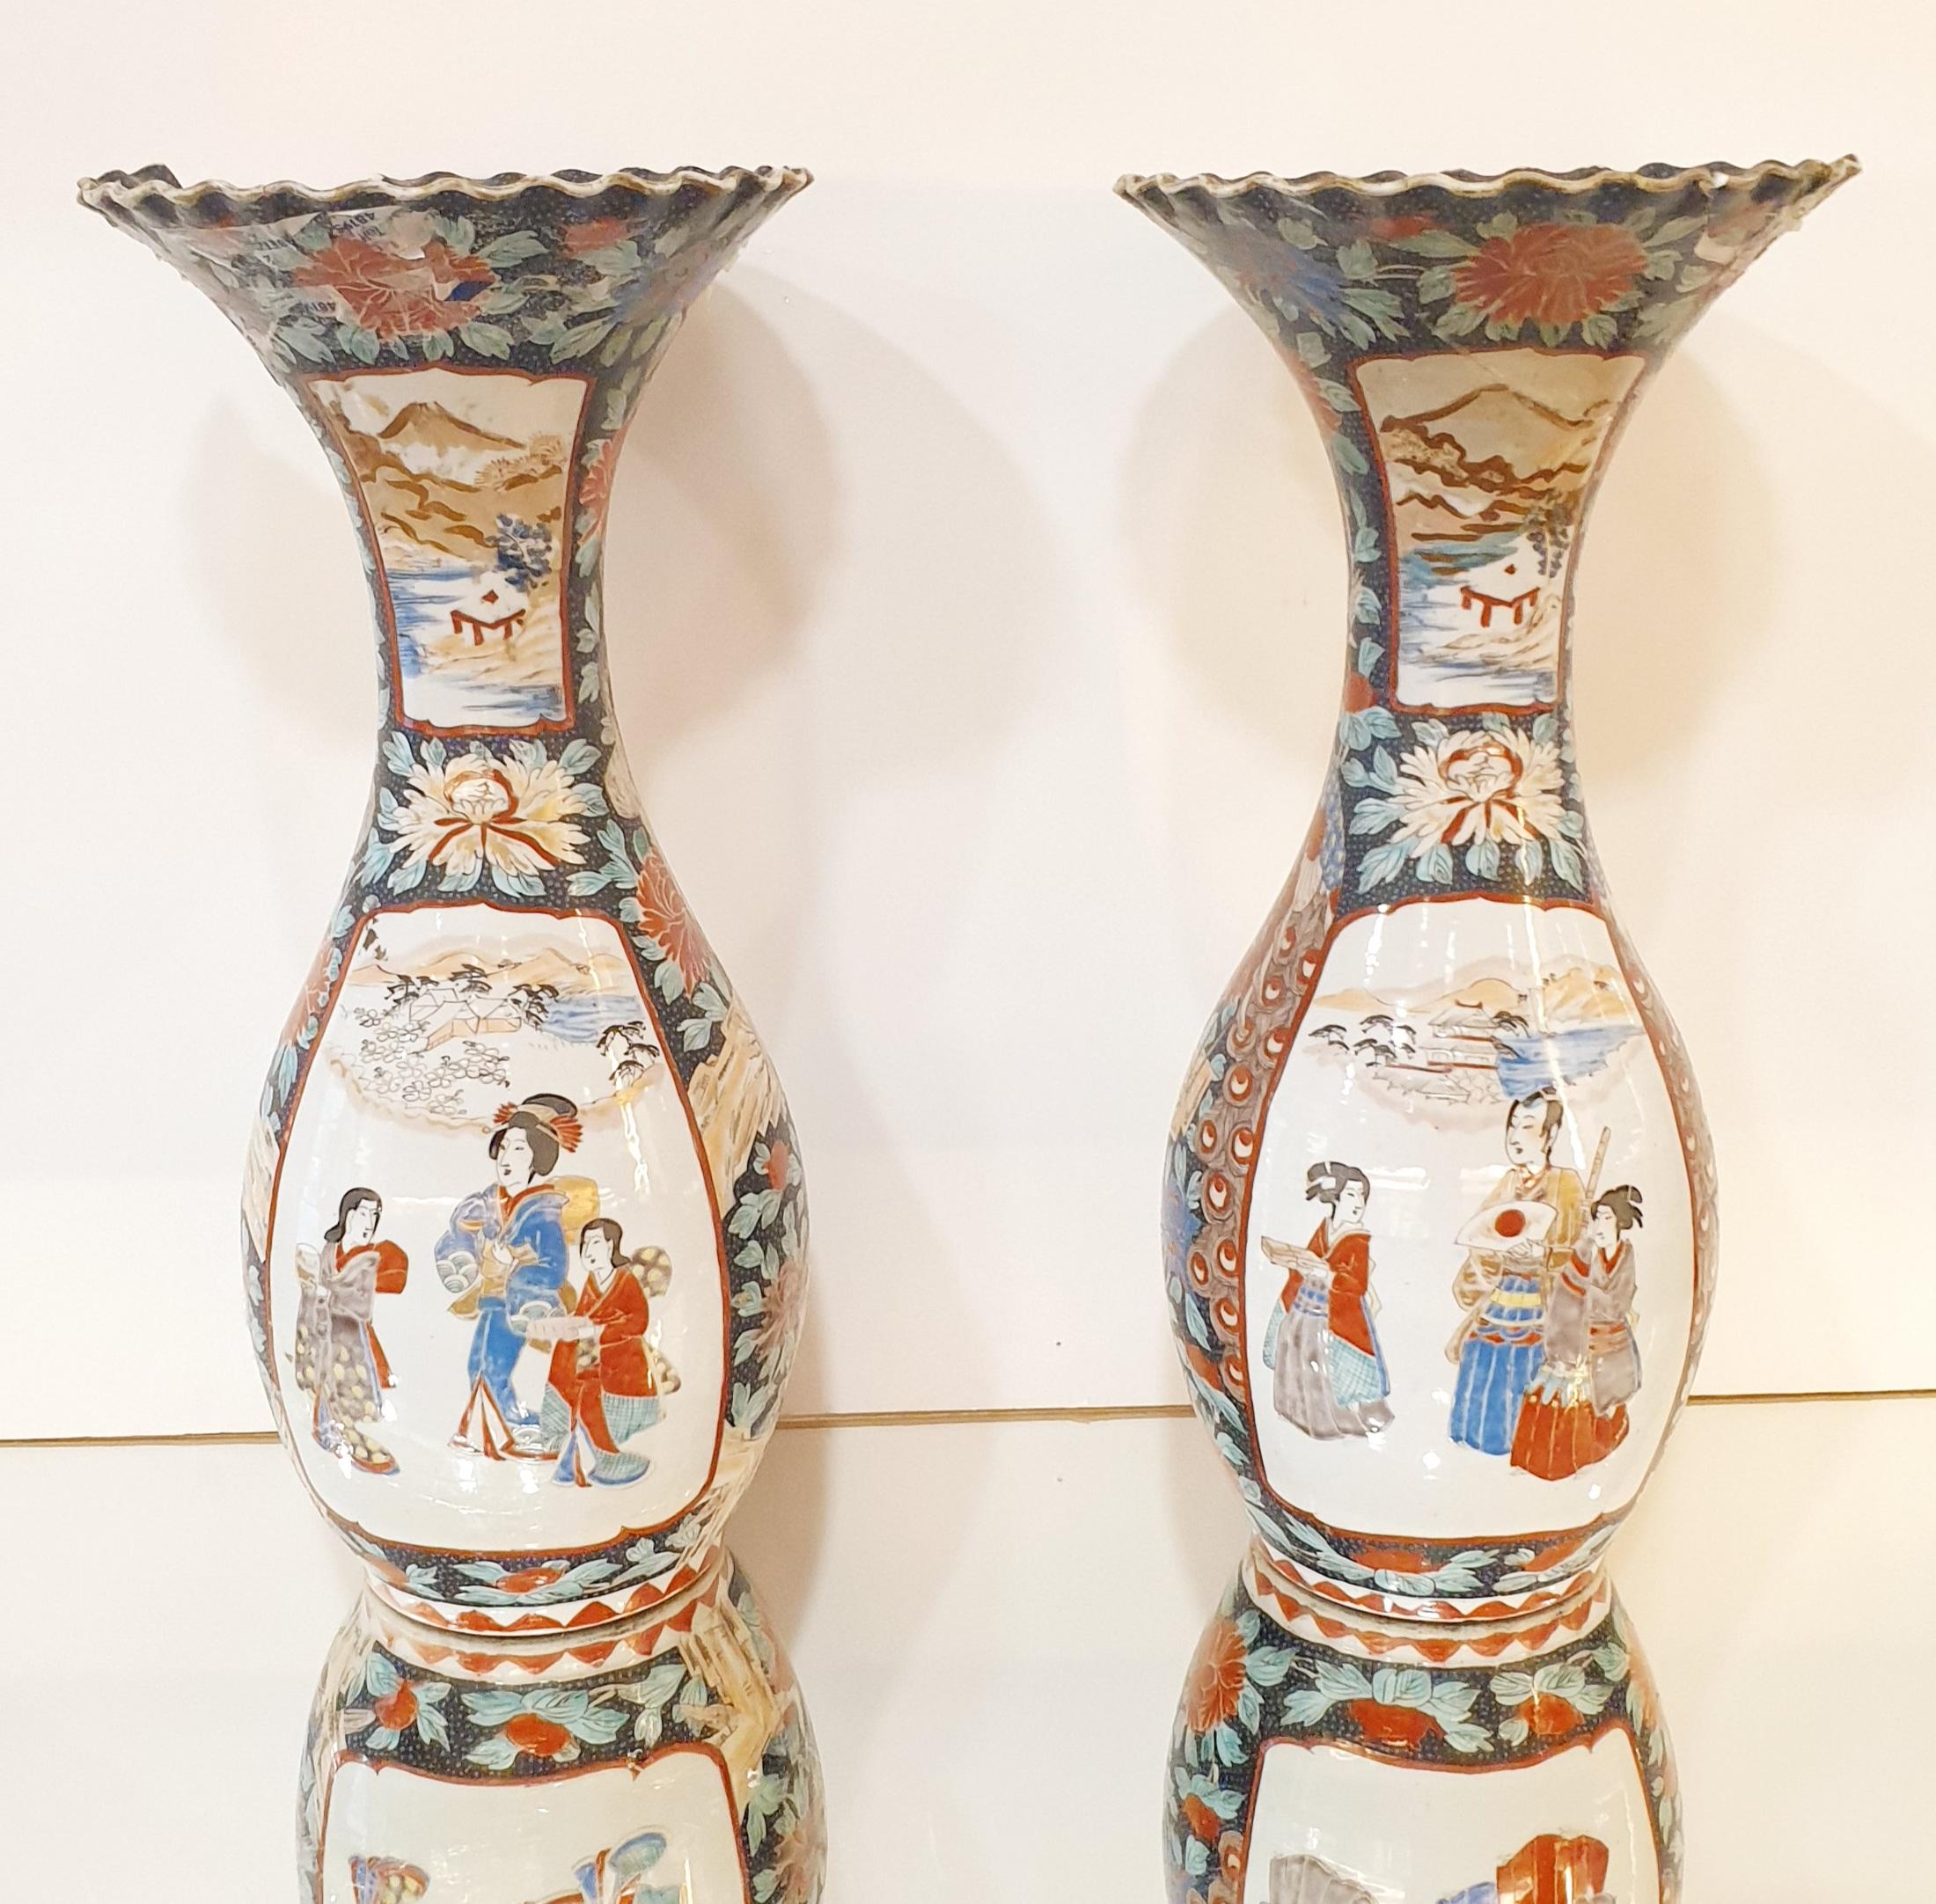 Chinese Ceramic vases mid XX century with option for electricity and convert them in lamps.
Beautiful pieces for central decor of living room or main reception area.
Beautiful Coral and green design and dragons. 
Sizes 43 x 20 cm / 16.9 x 7.87